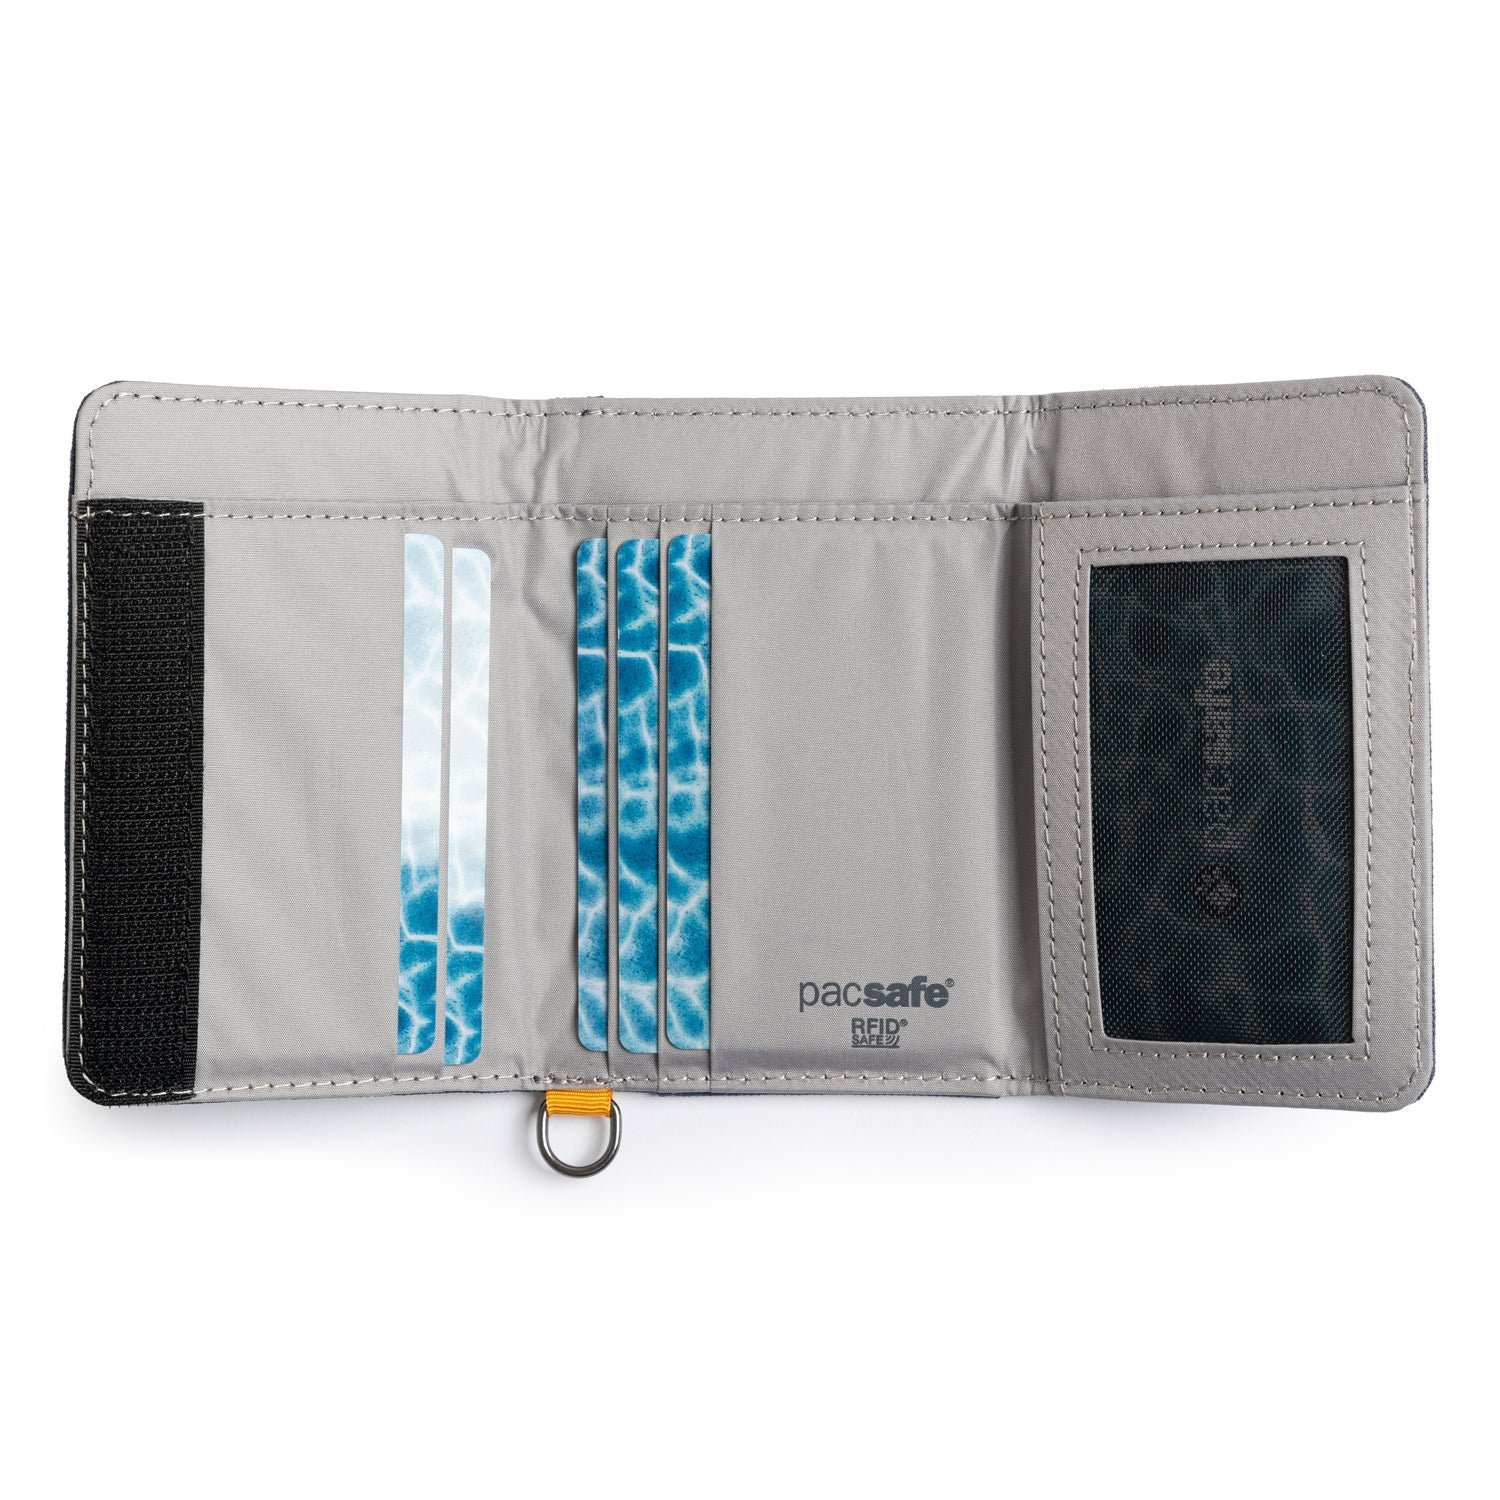 RFIDsafe RFID blocking trifold wallet  Pacsafe® - Pacsafe – Official APAC  Store